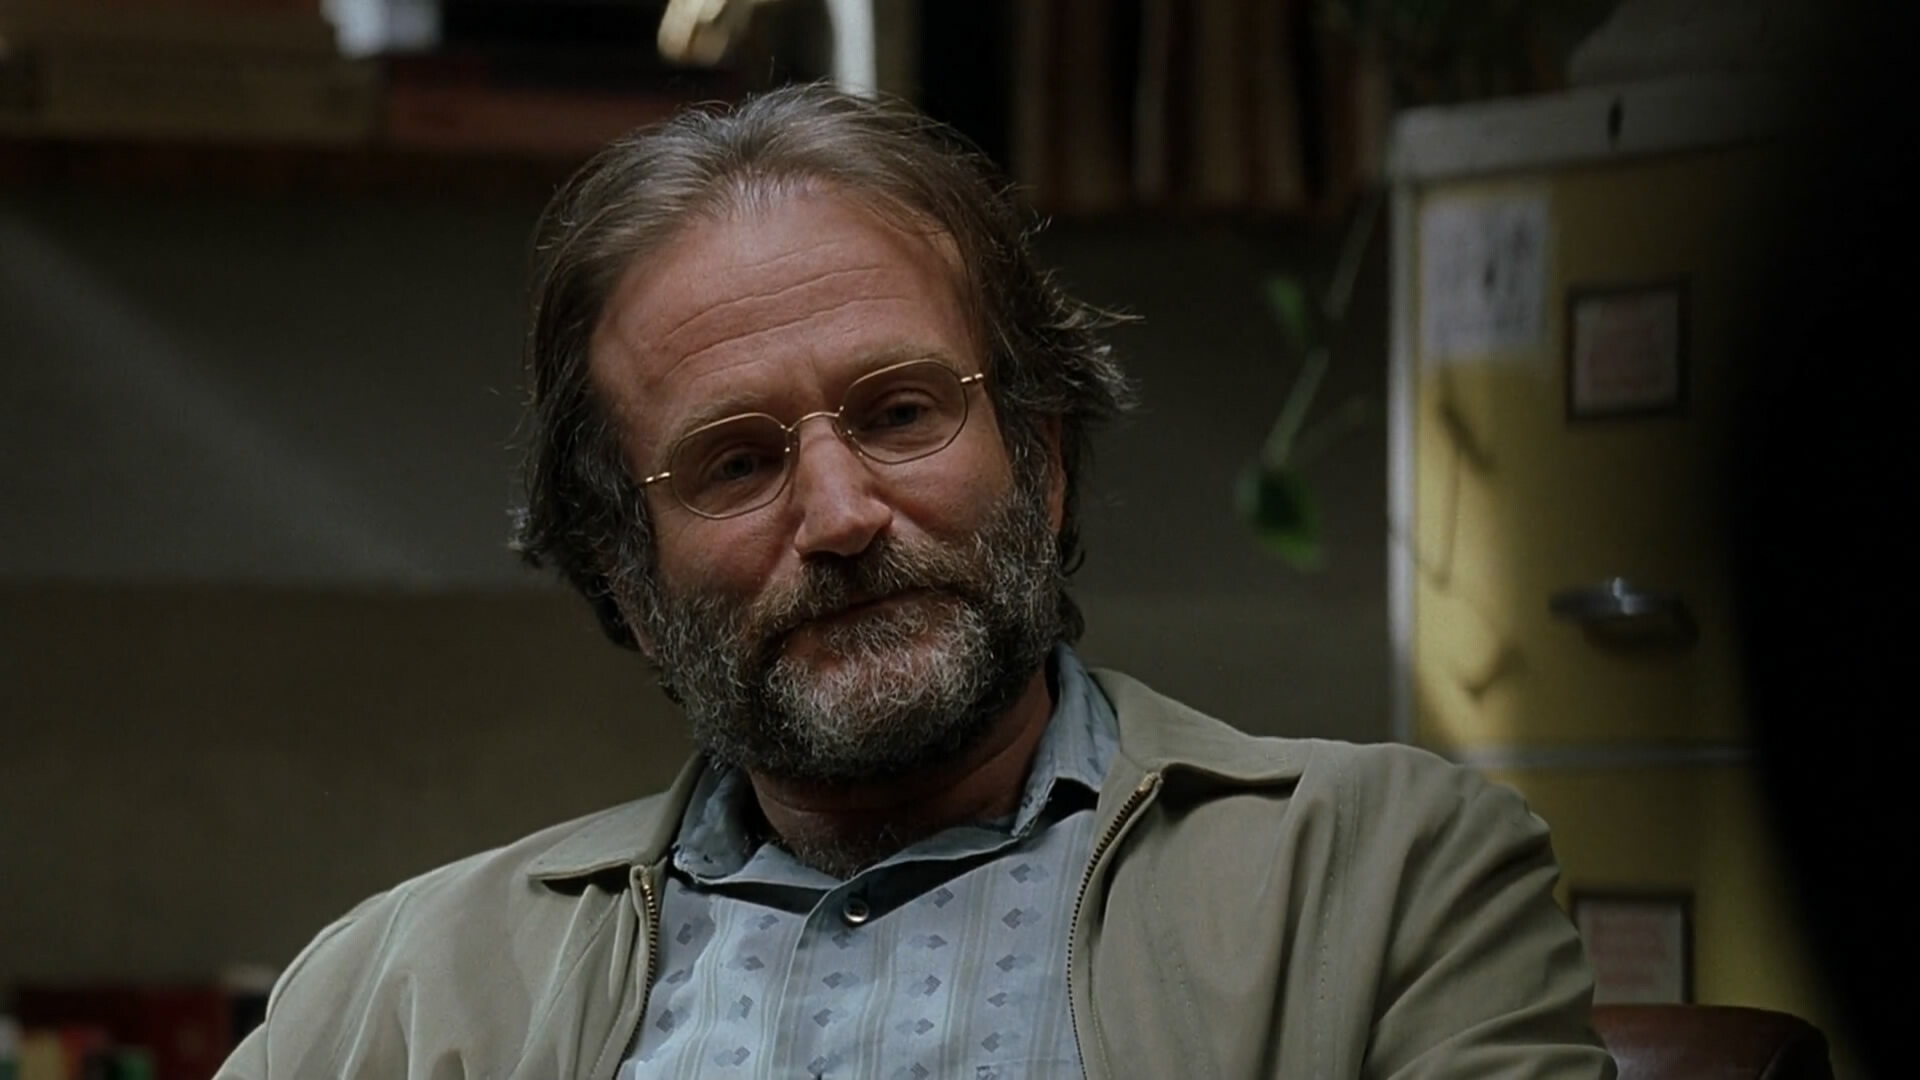 Good Will Hunting: Robin Williams took a support role of Dr. Sean Maguire. 1920x1080 Full HD Wallpaper.